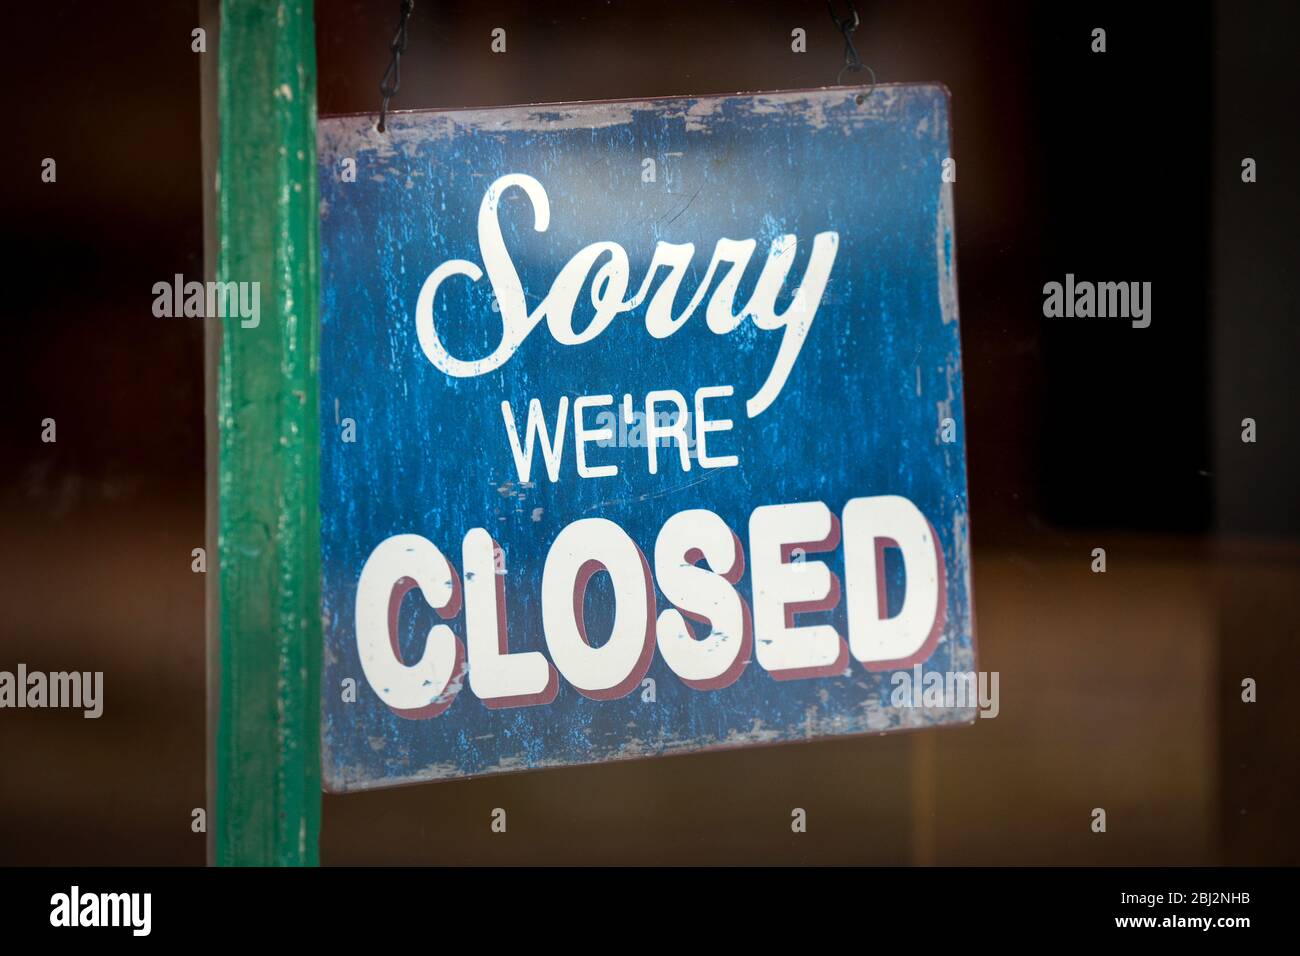 Closed sign in a shop window Stock Photo